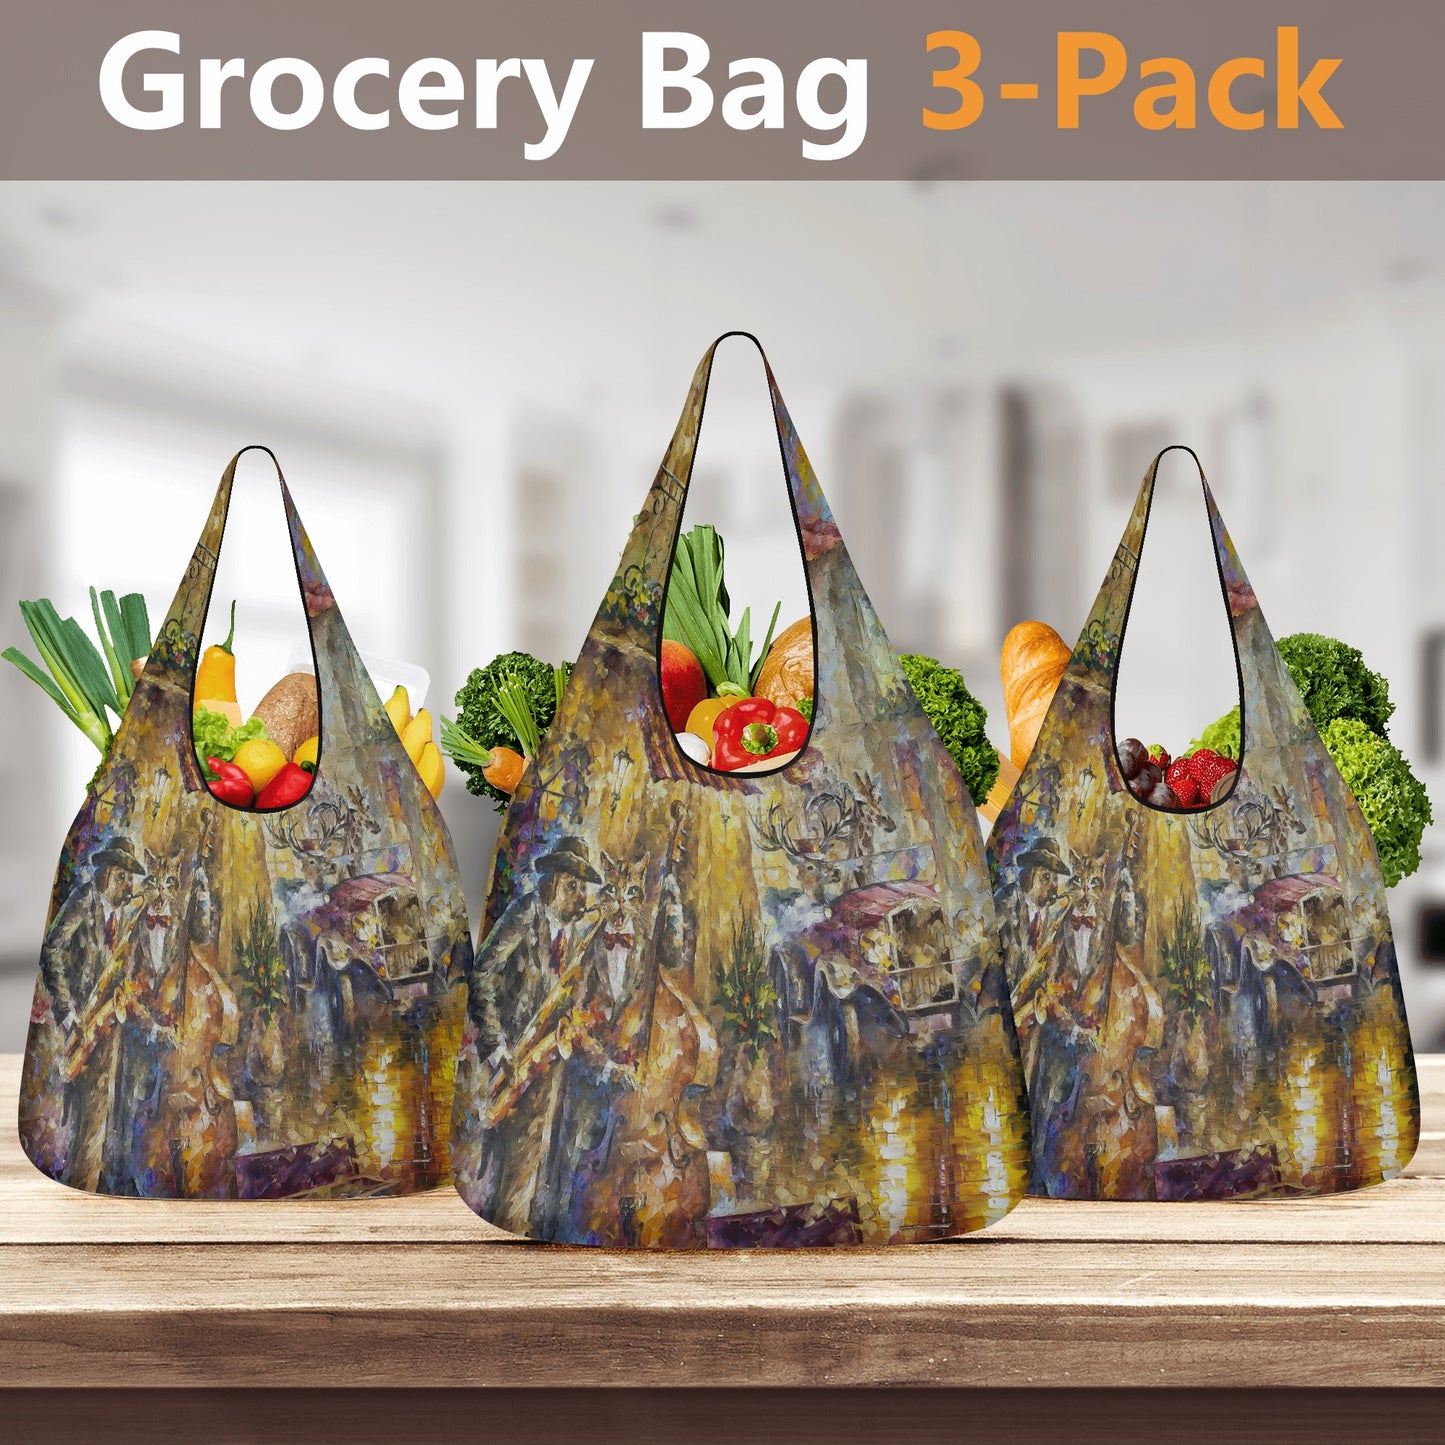 3 Pack of Grocery Bags @FanClub By AFREMOV.COM